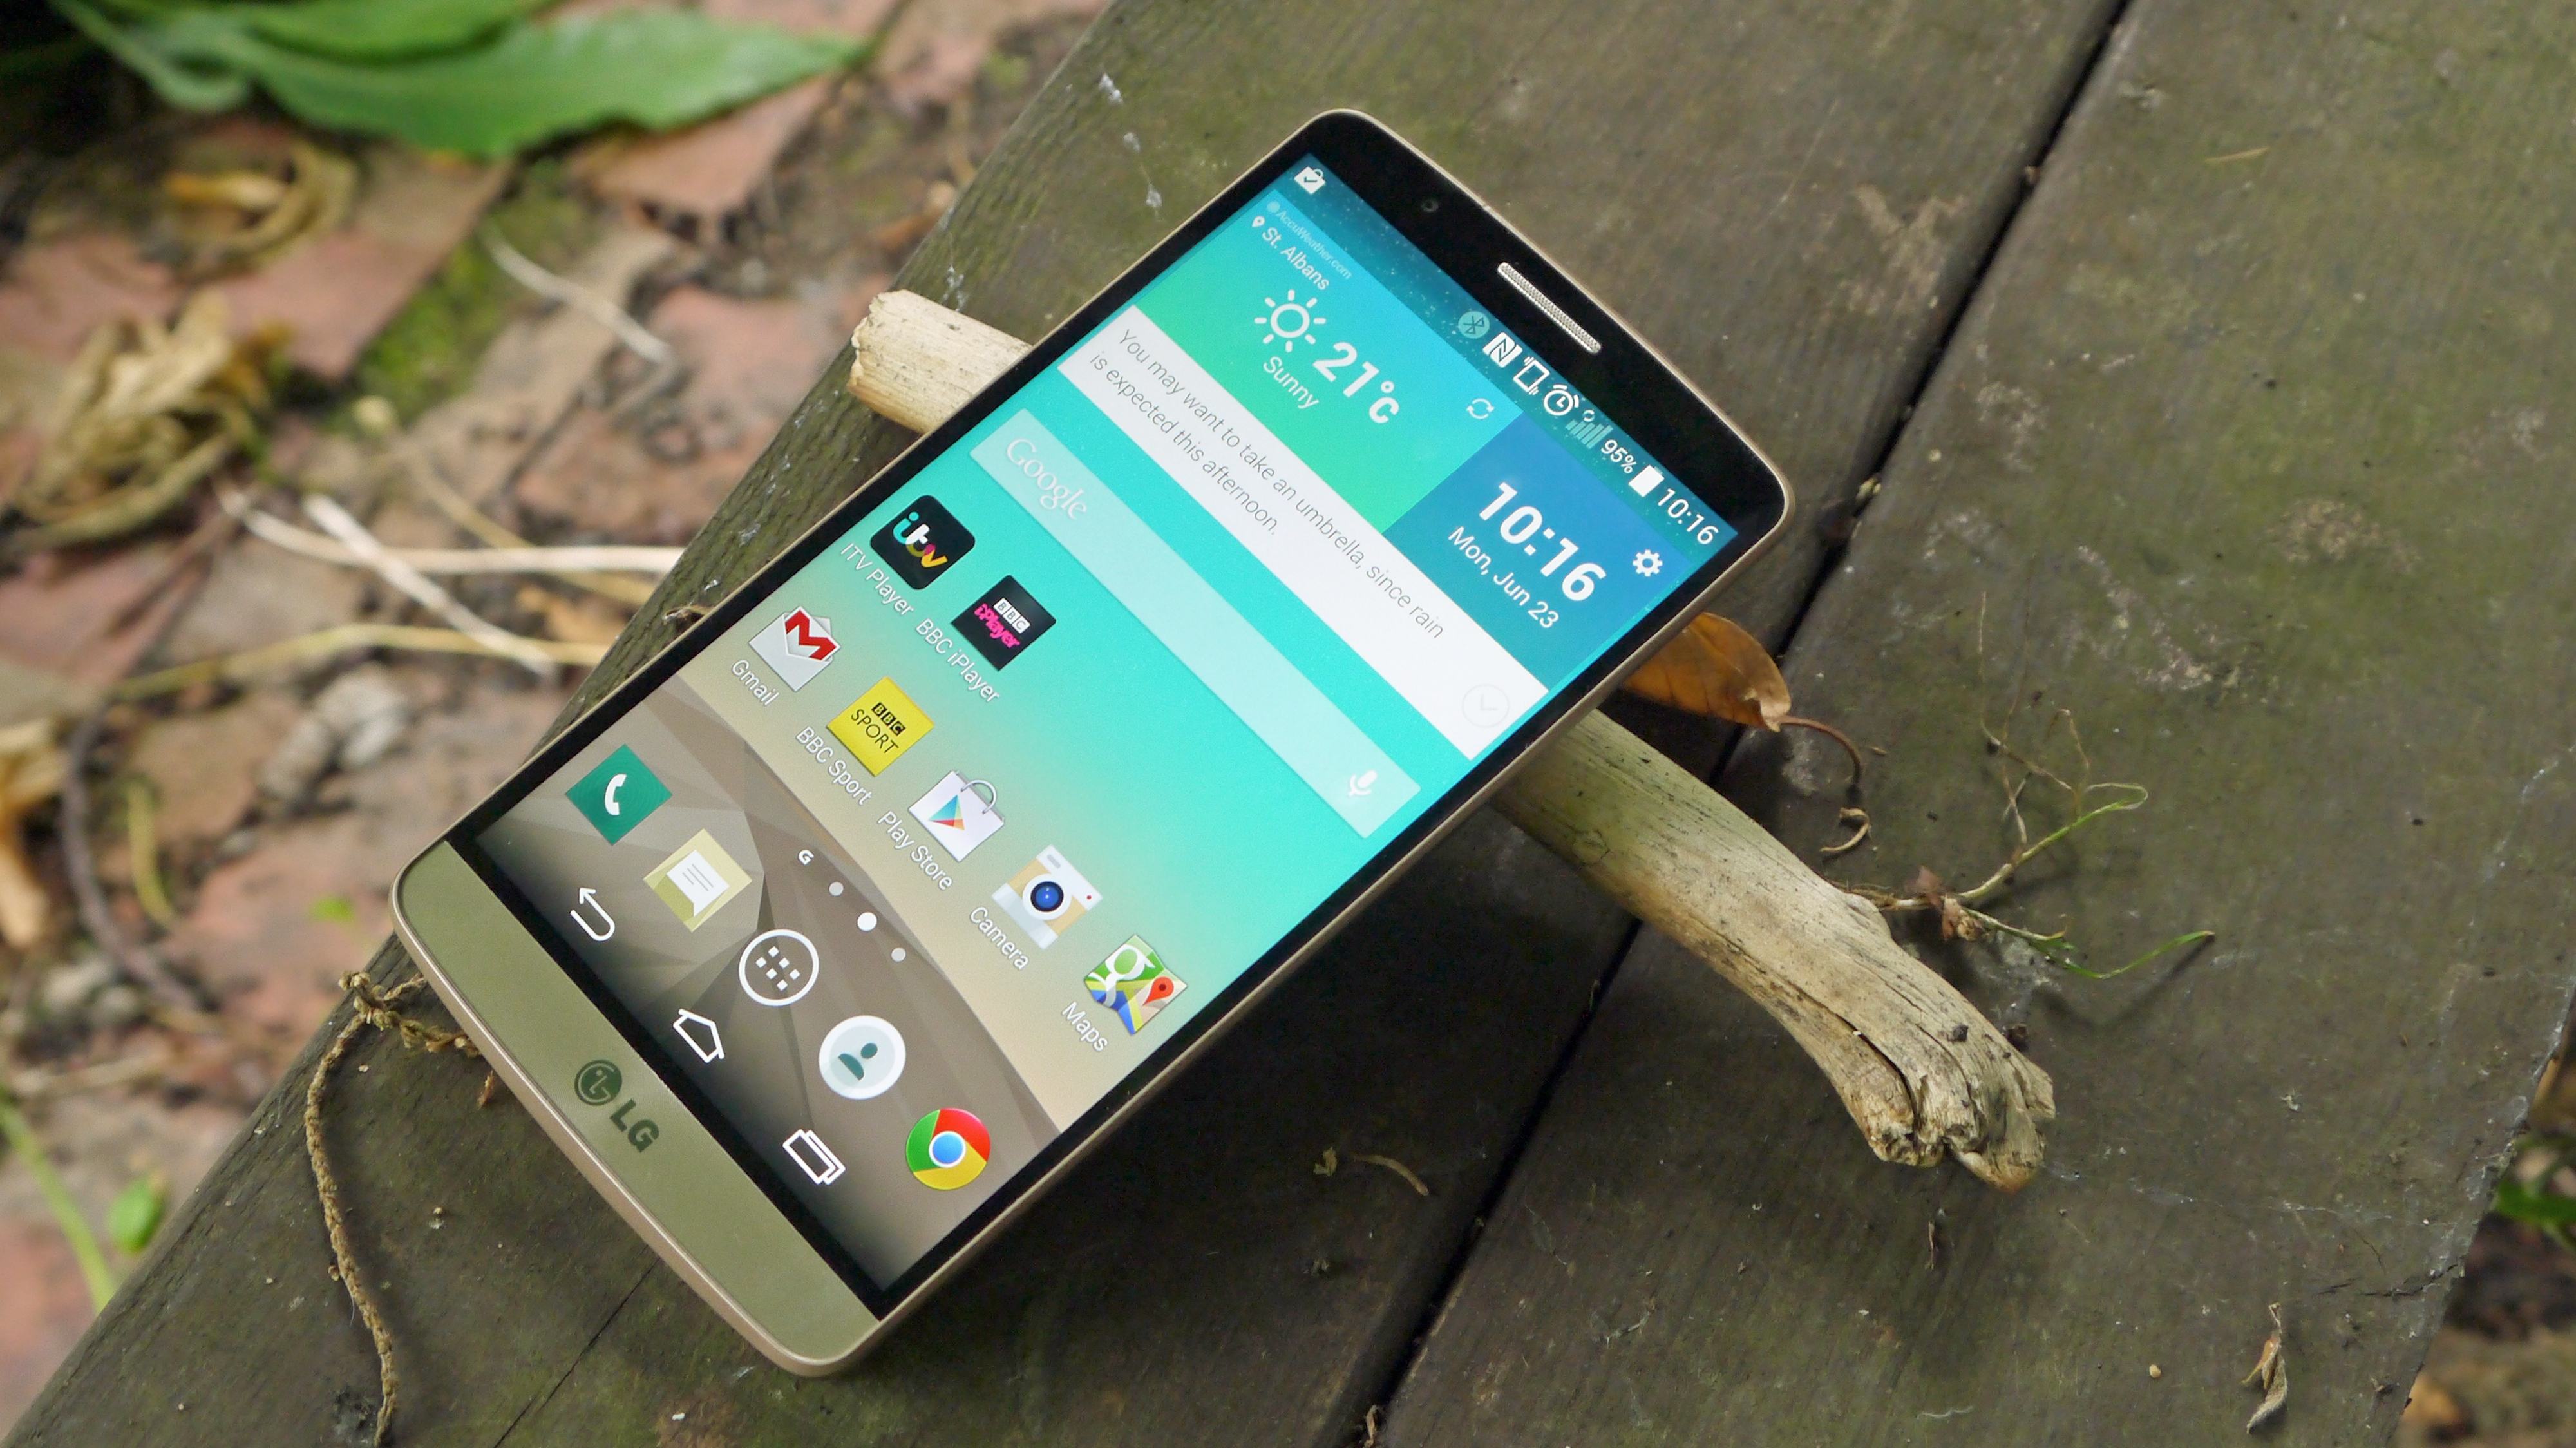 LG G3 Review: Ultra-thin Bezels And A Quad HD Display Brings A New King